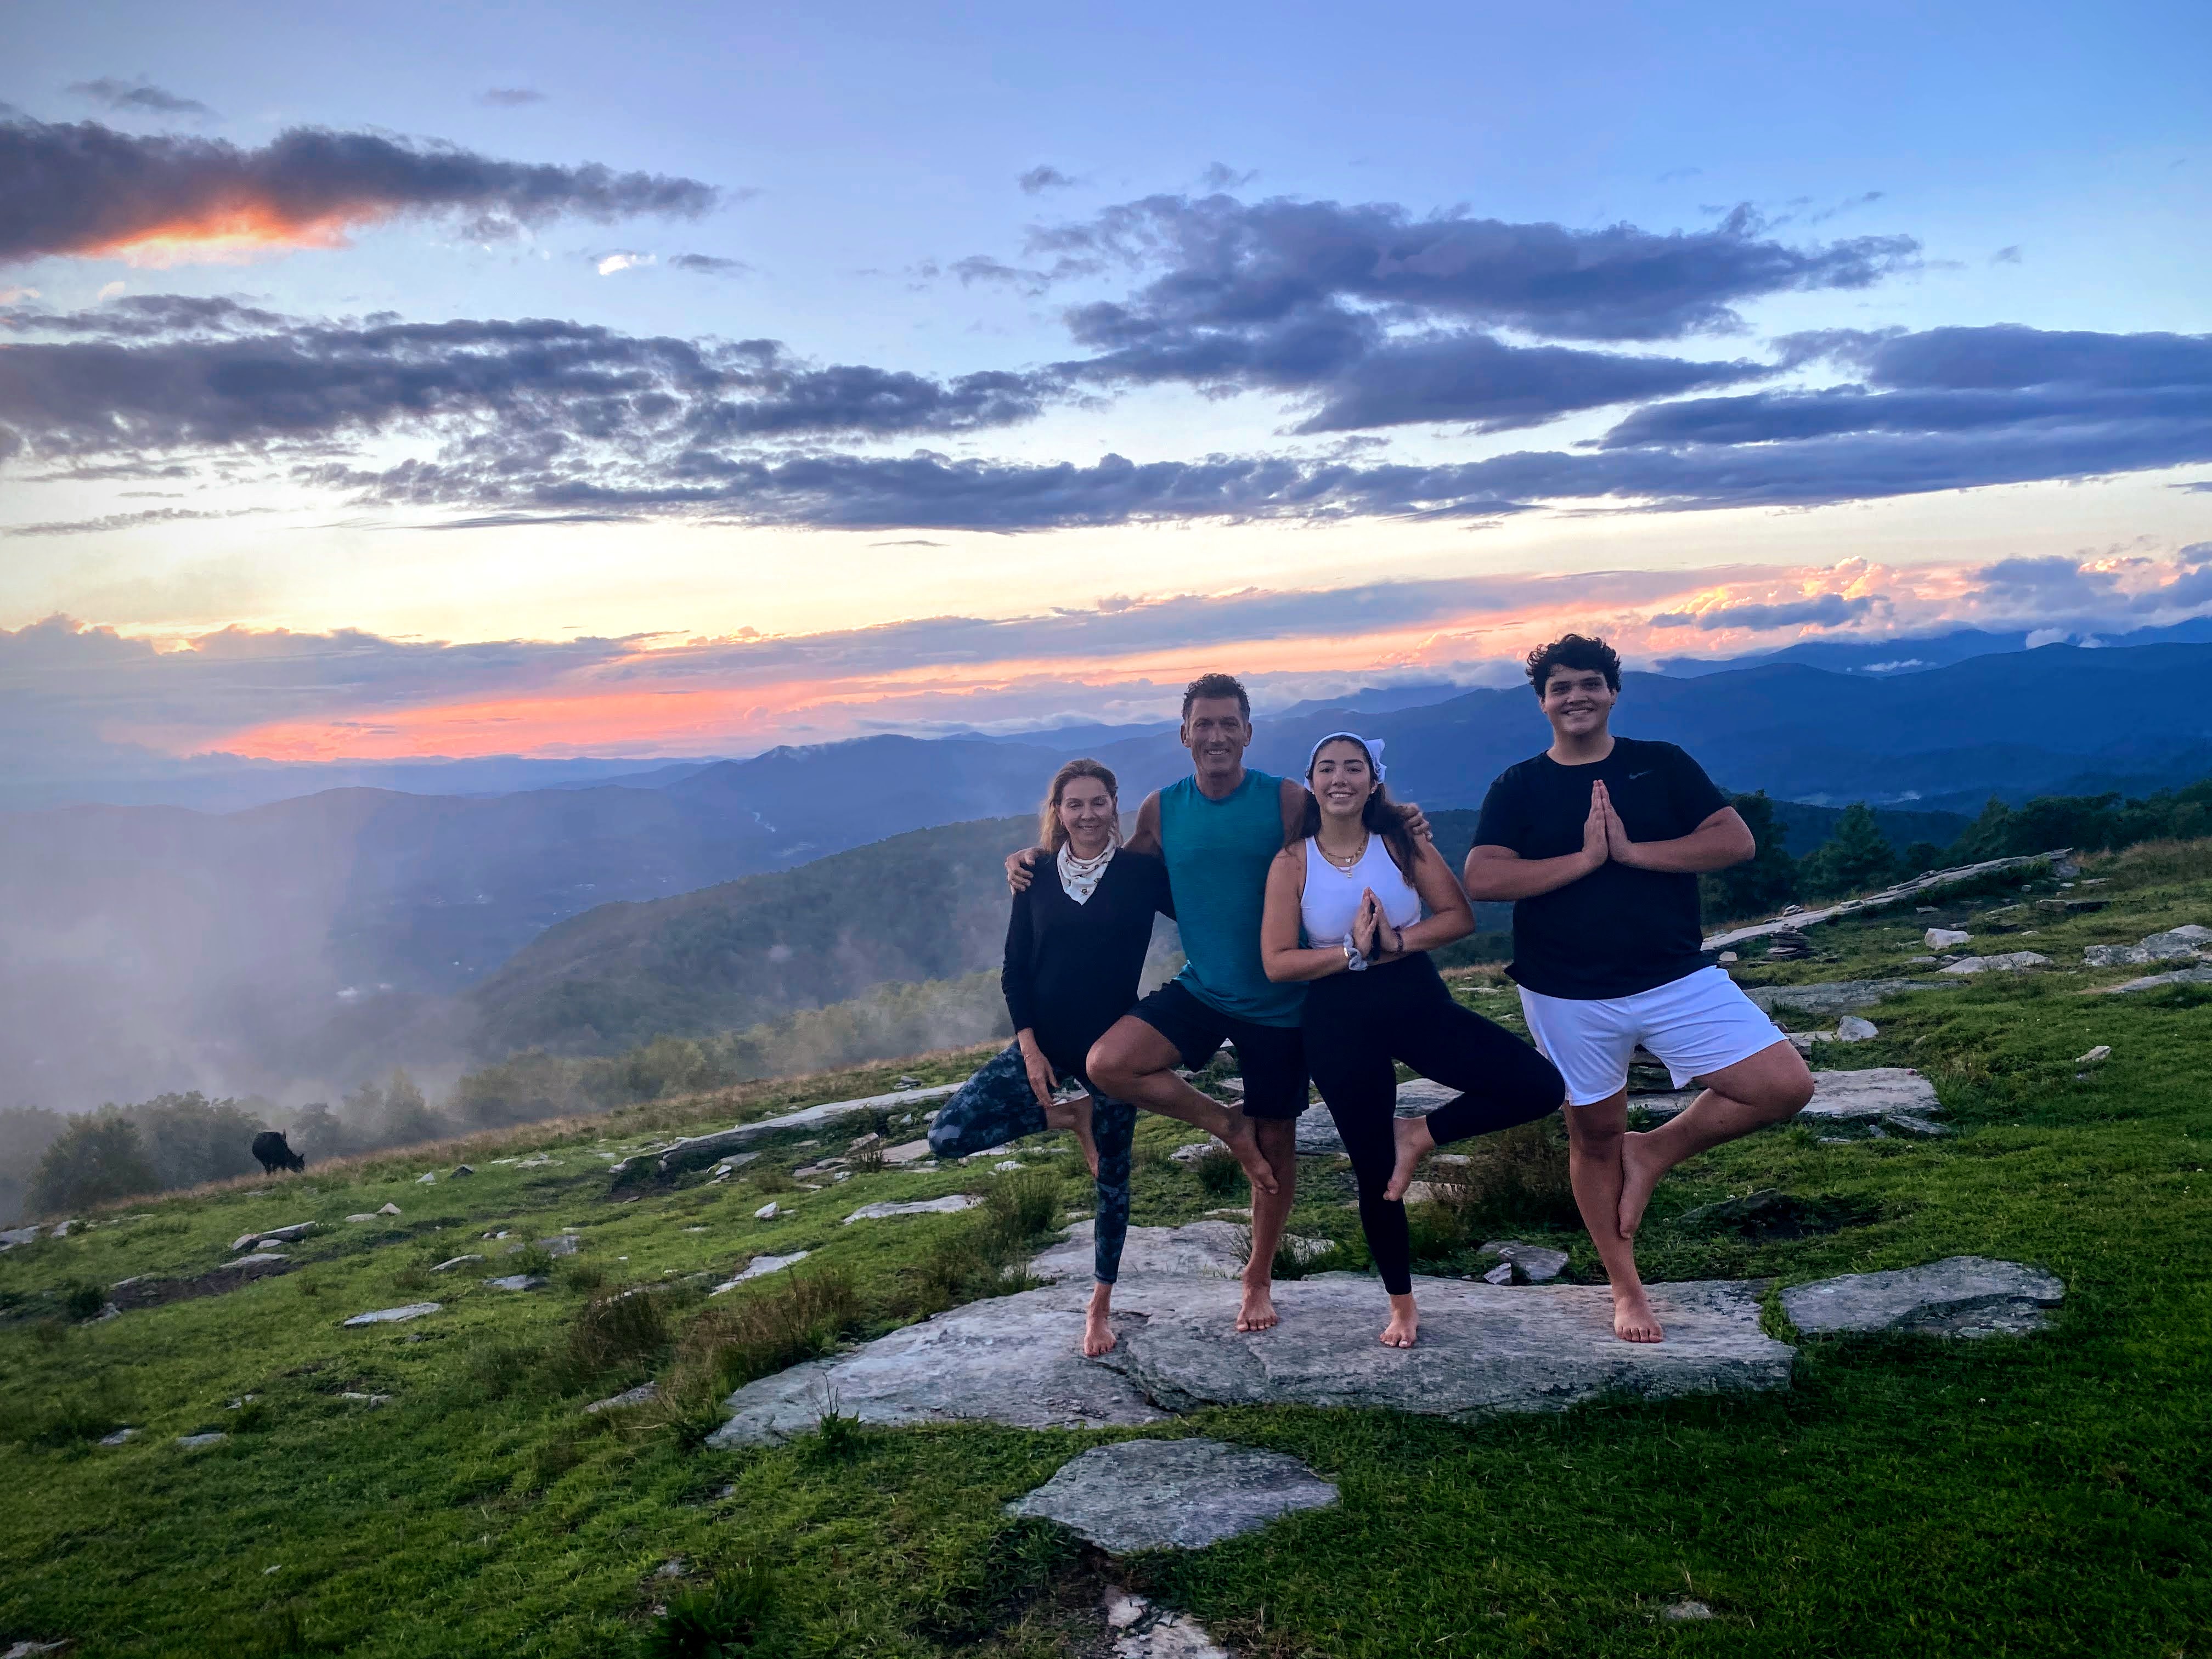 asheville wellness tours | asheville, nc's official travel site